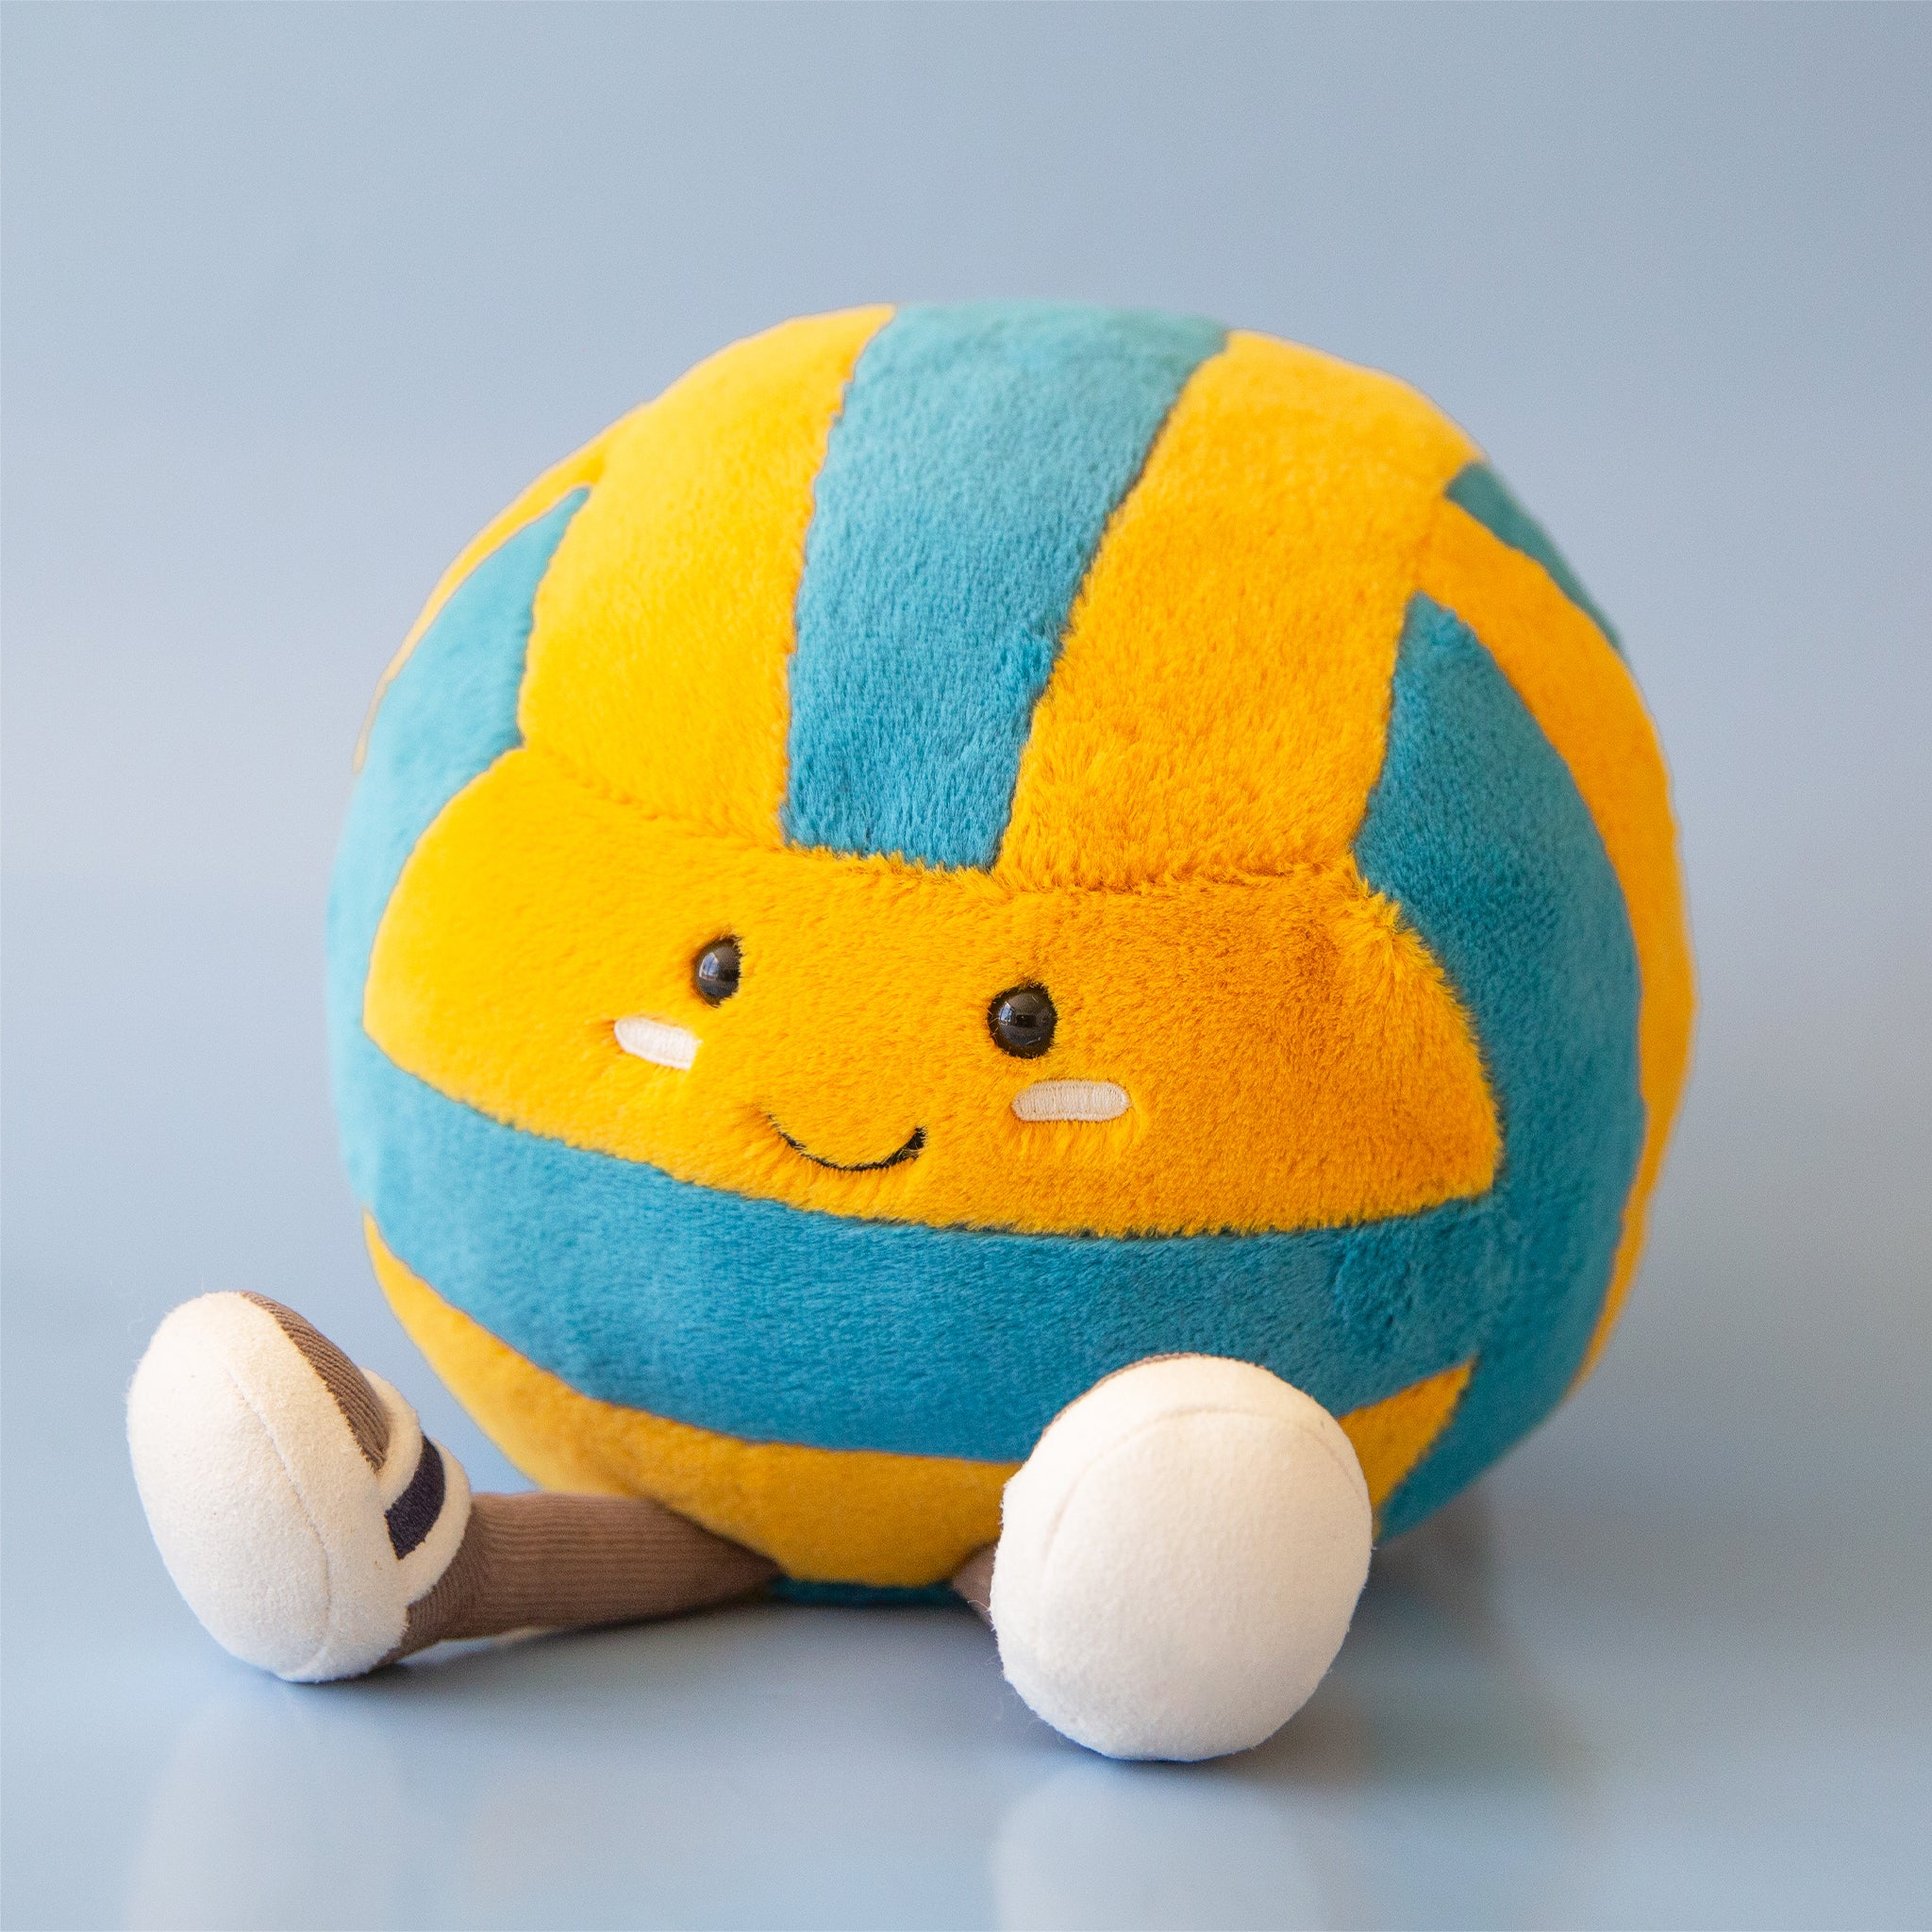 A blue and yellow stuffed toy in the shape of a volleyball with adorable legs, feet and a smiling face.